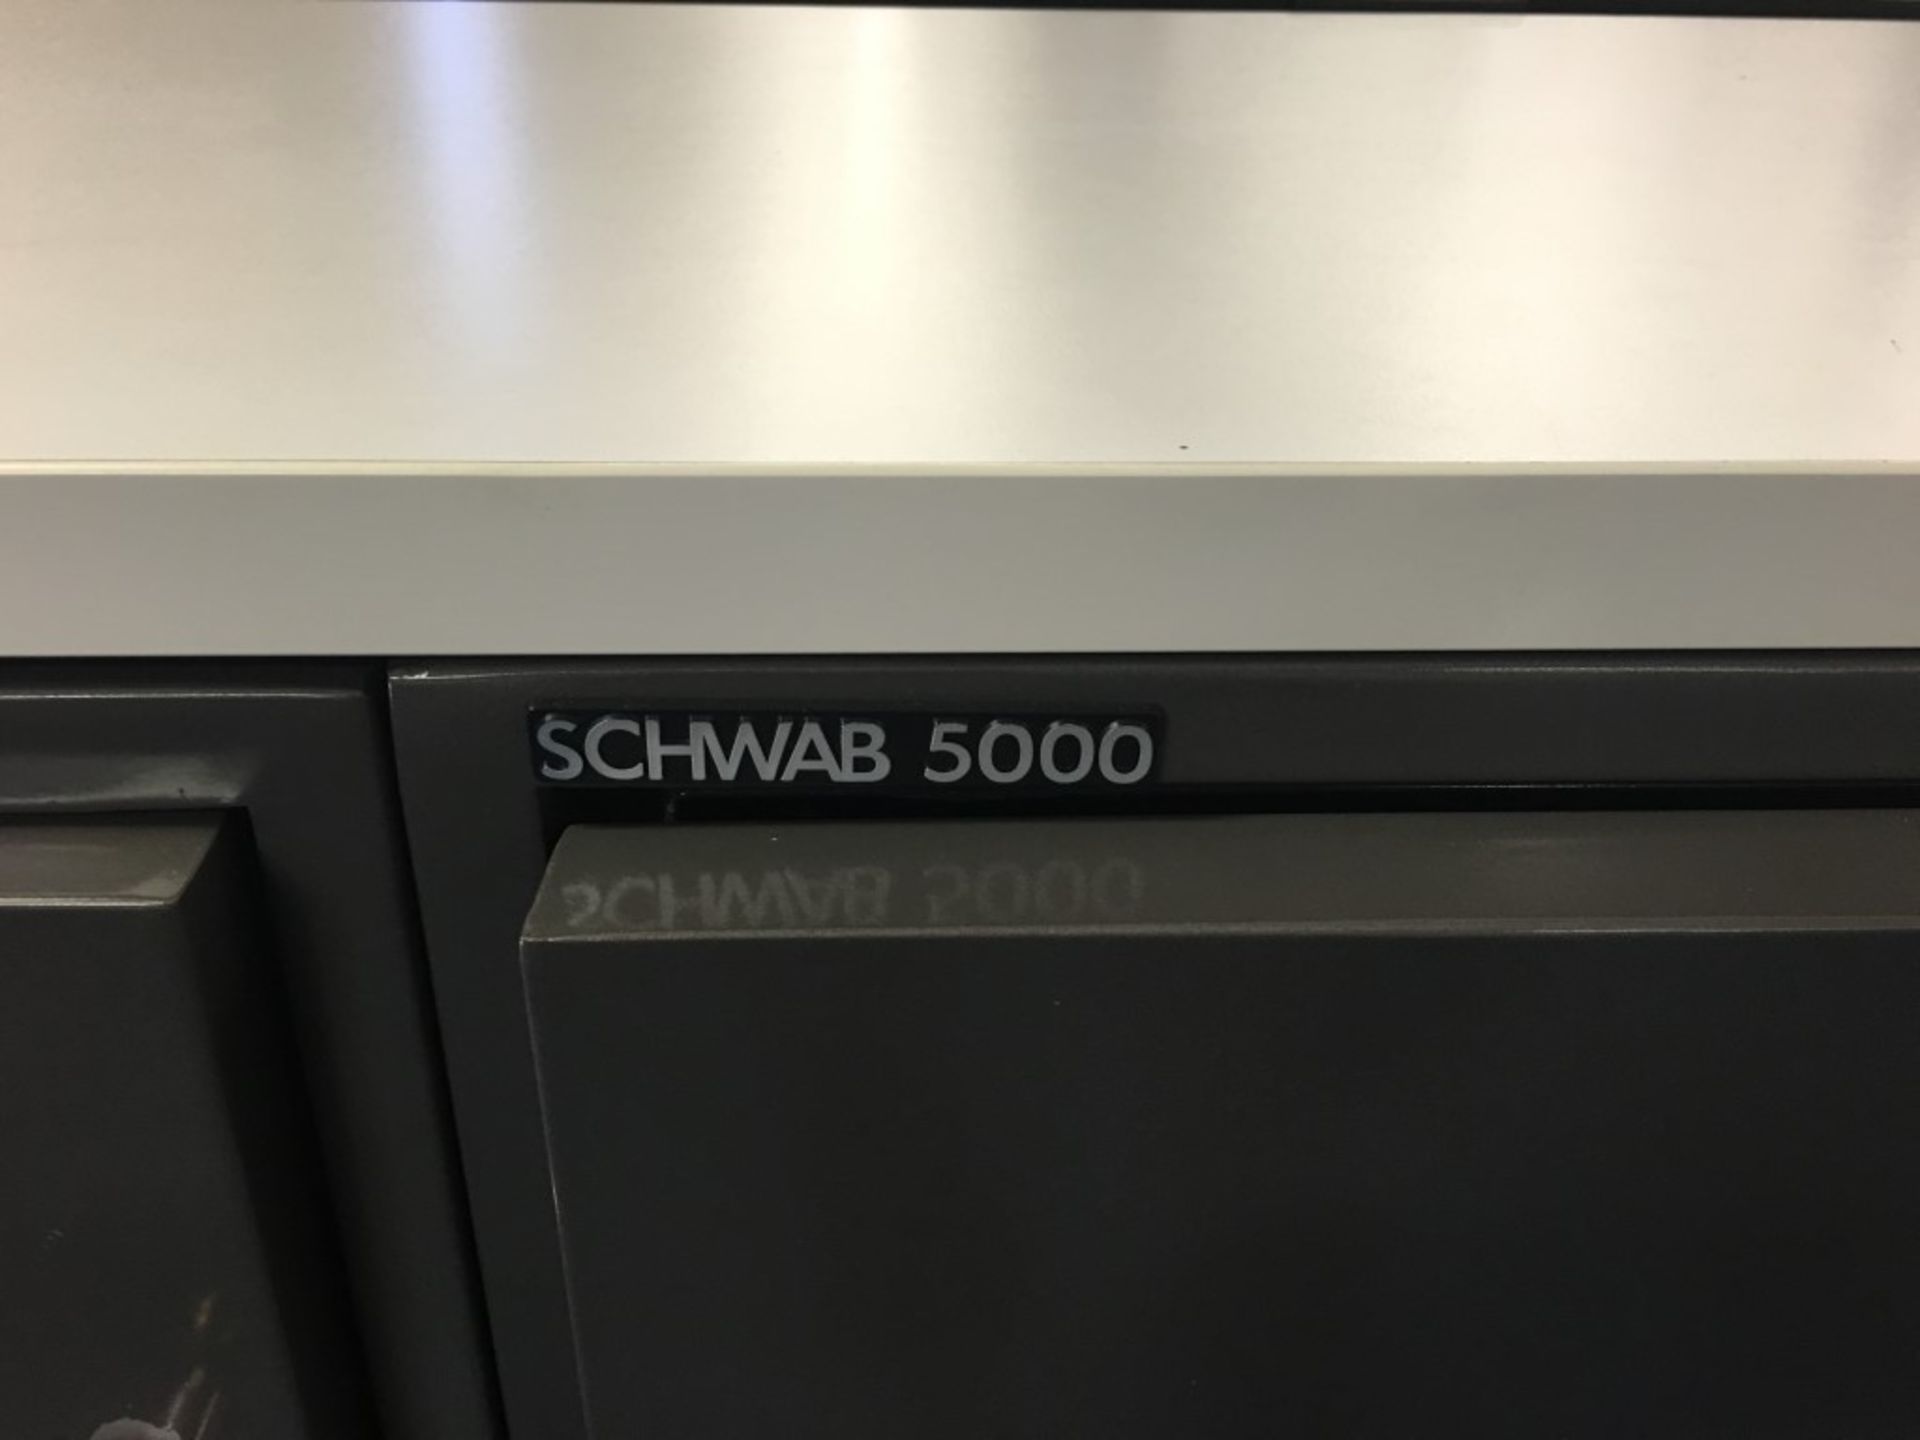 2 PCS OF SCHWAB 5000 FIRE PROOF FILE CABINETS WITH WHITE LAMINATE TABLE TOP. WITH KEYS. - Image 3 of 4